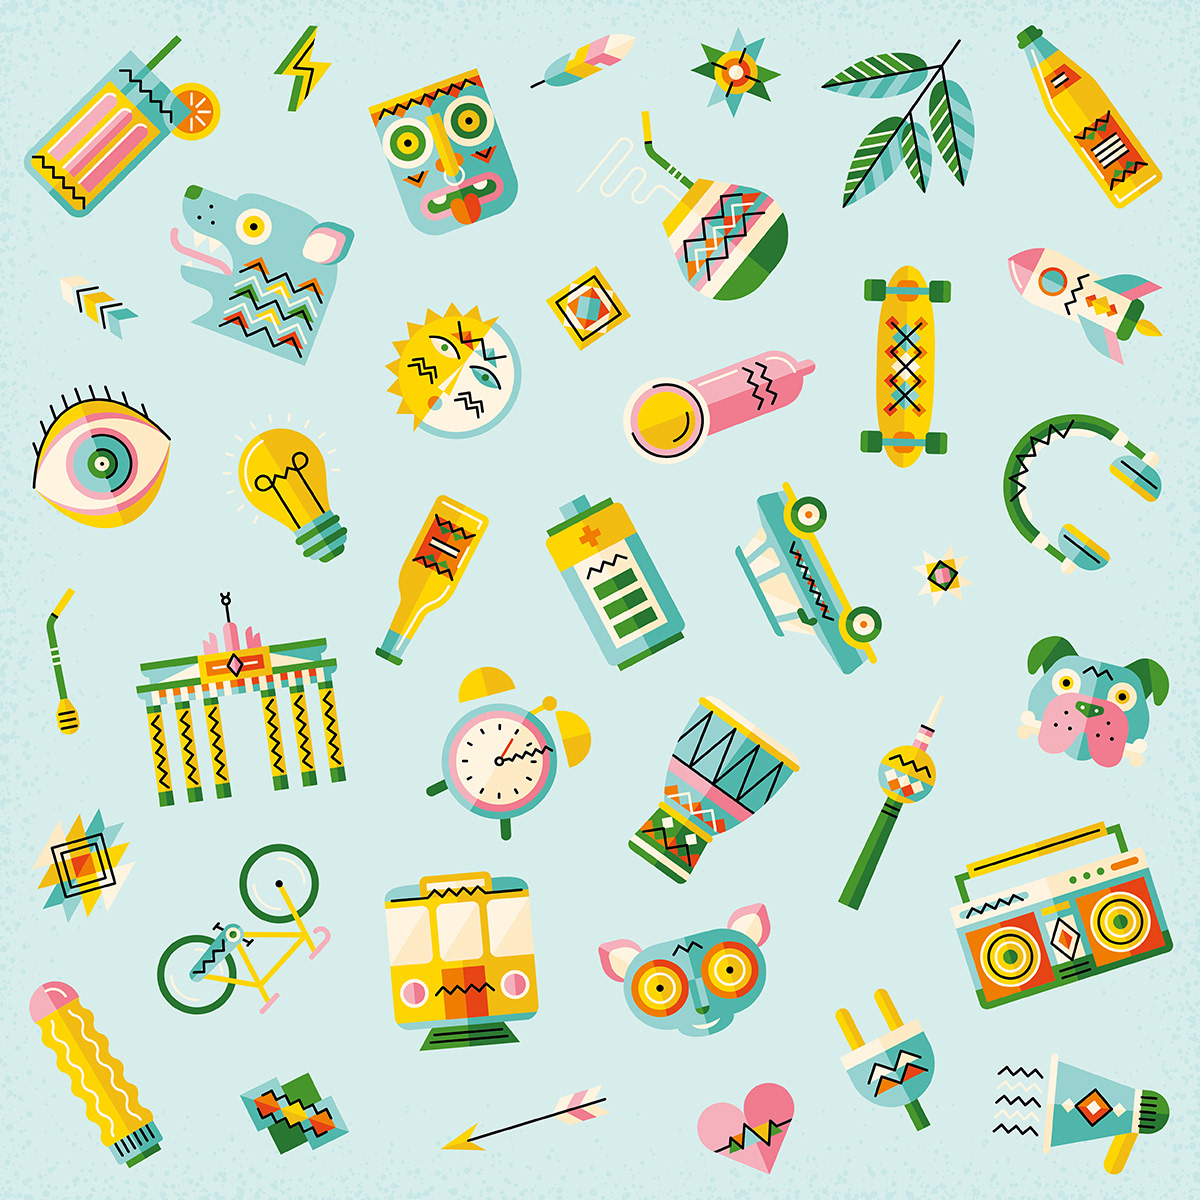 Illustrative icon pattern for Thomas Henry’s Mate Mate lemonade by Adrian Bauer